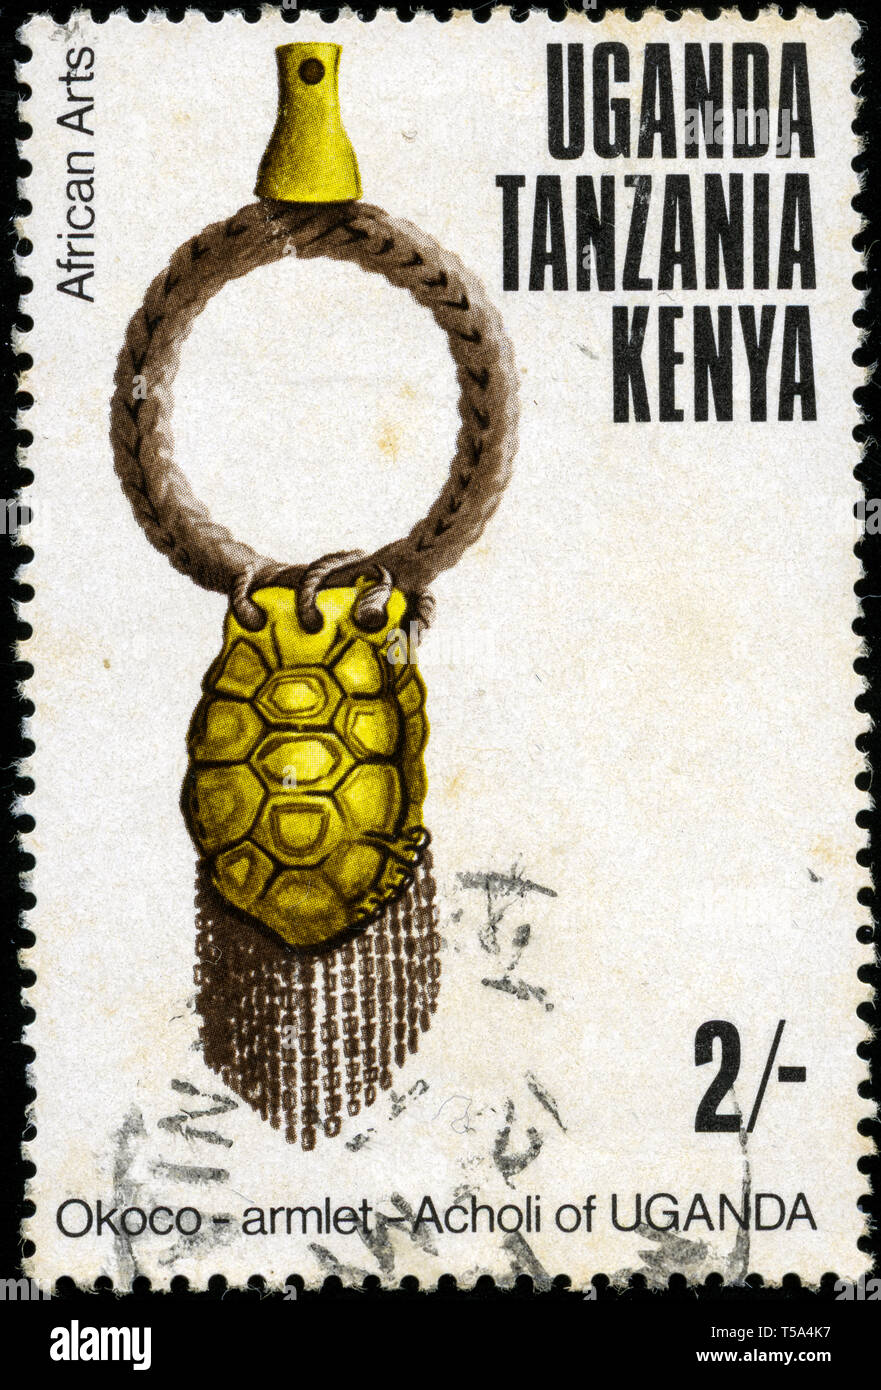 Postage stamp from British East Africa (Kenya, Uganda, Tanganika) in the African Arts series issued in 1975 Stock Photo